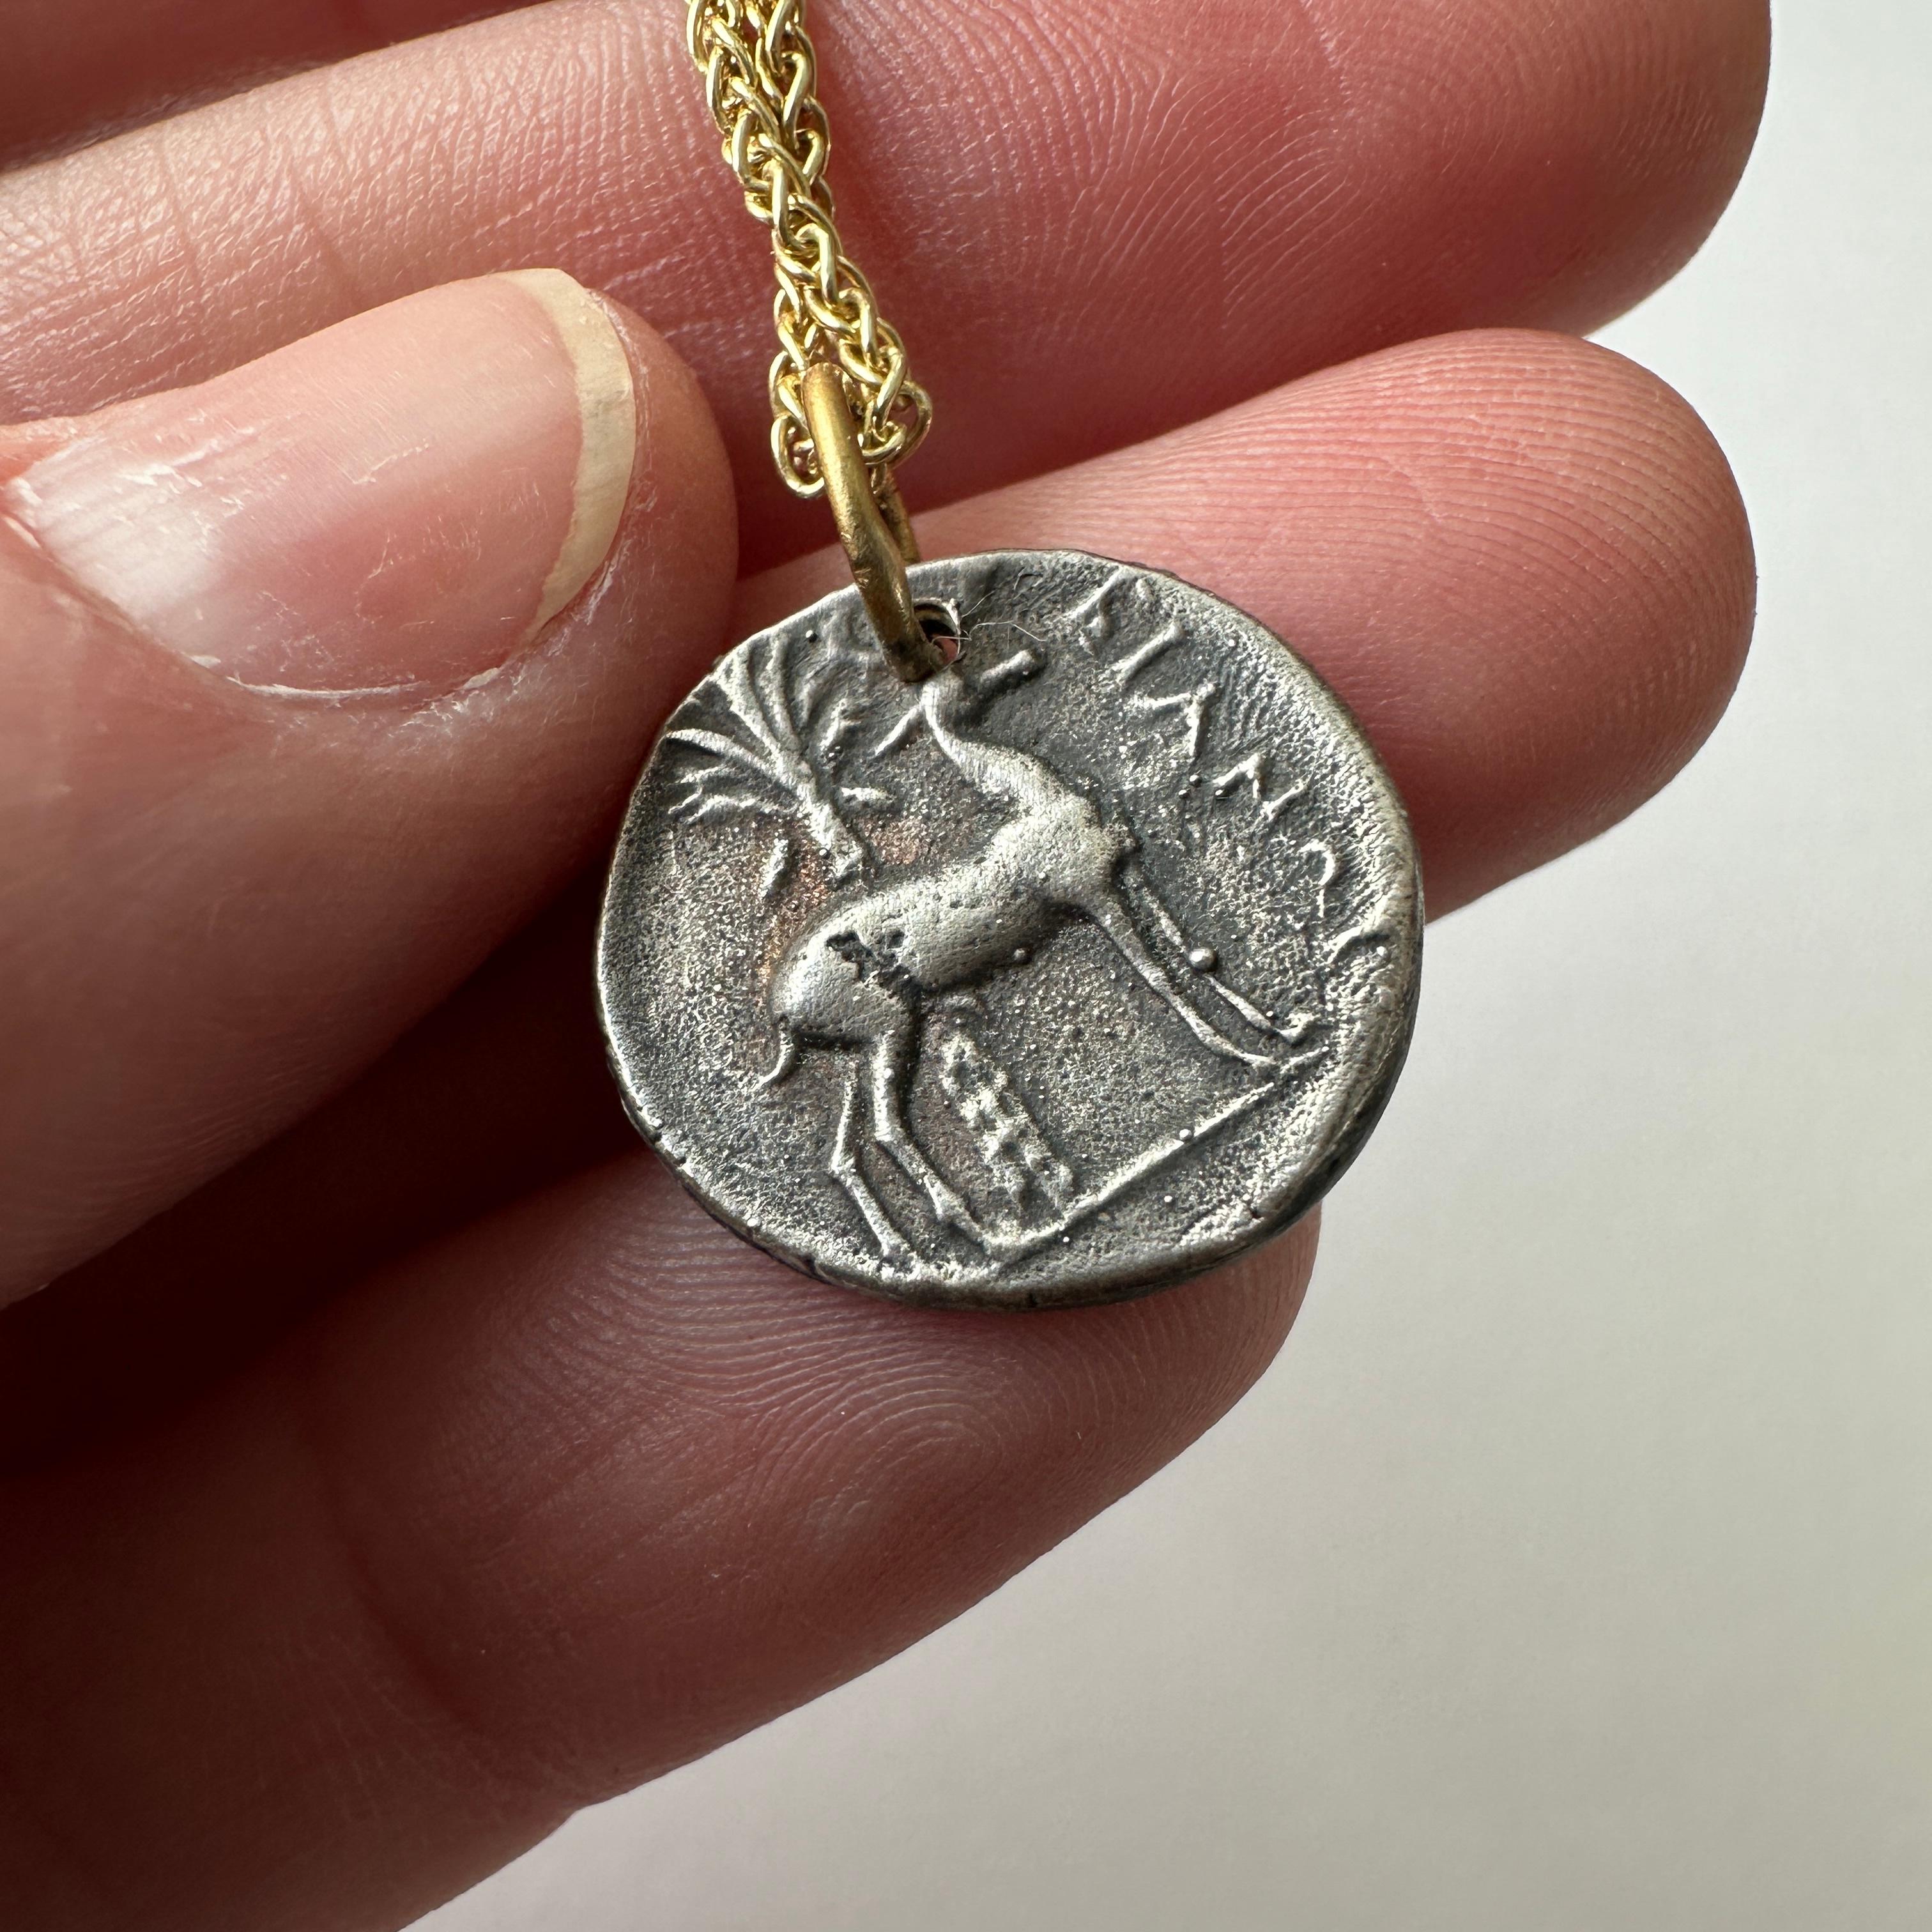 Round Cut Ephesus, Queen Bee, Tetra Drachm, Ancient Charm Coin (Replica) Pendant, 24kt Gol For Sale